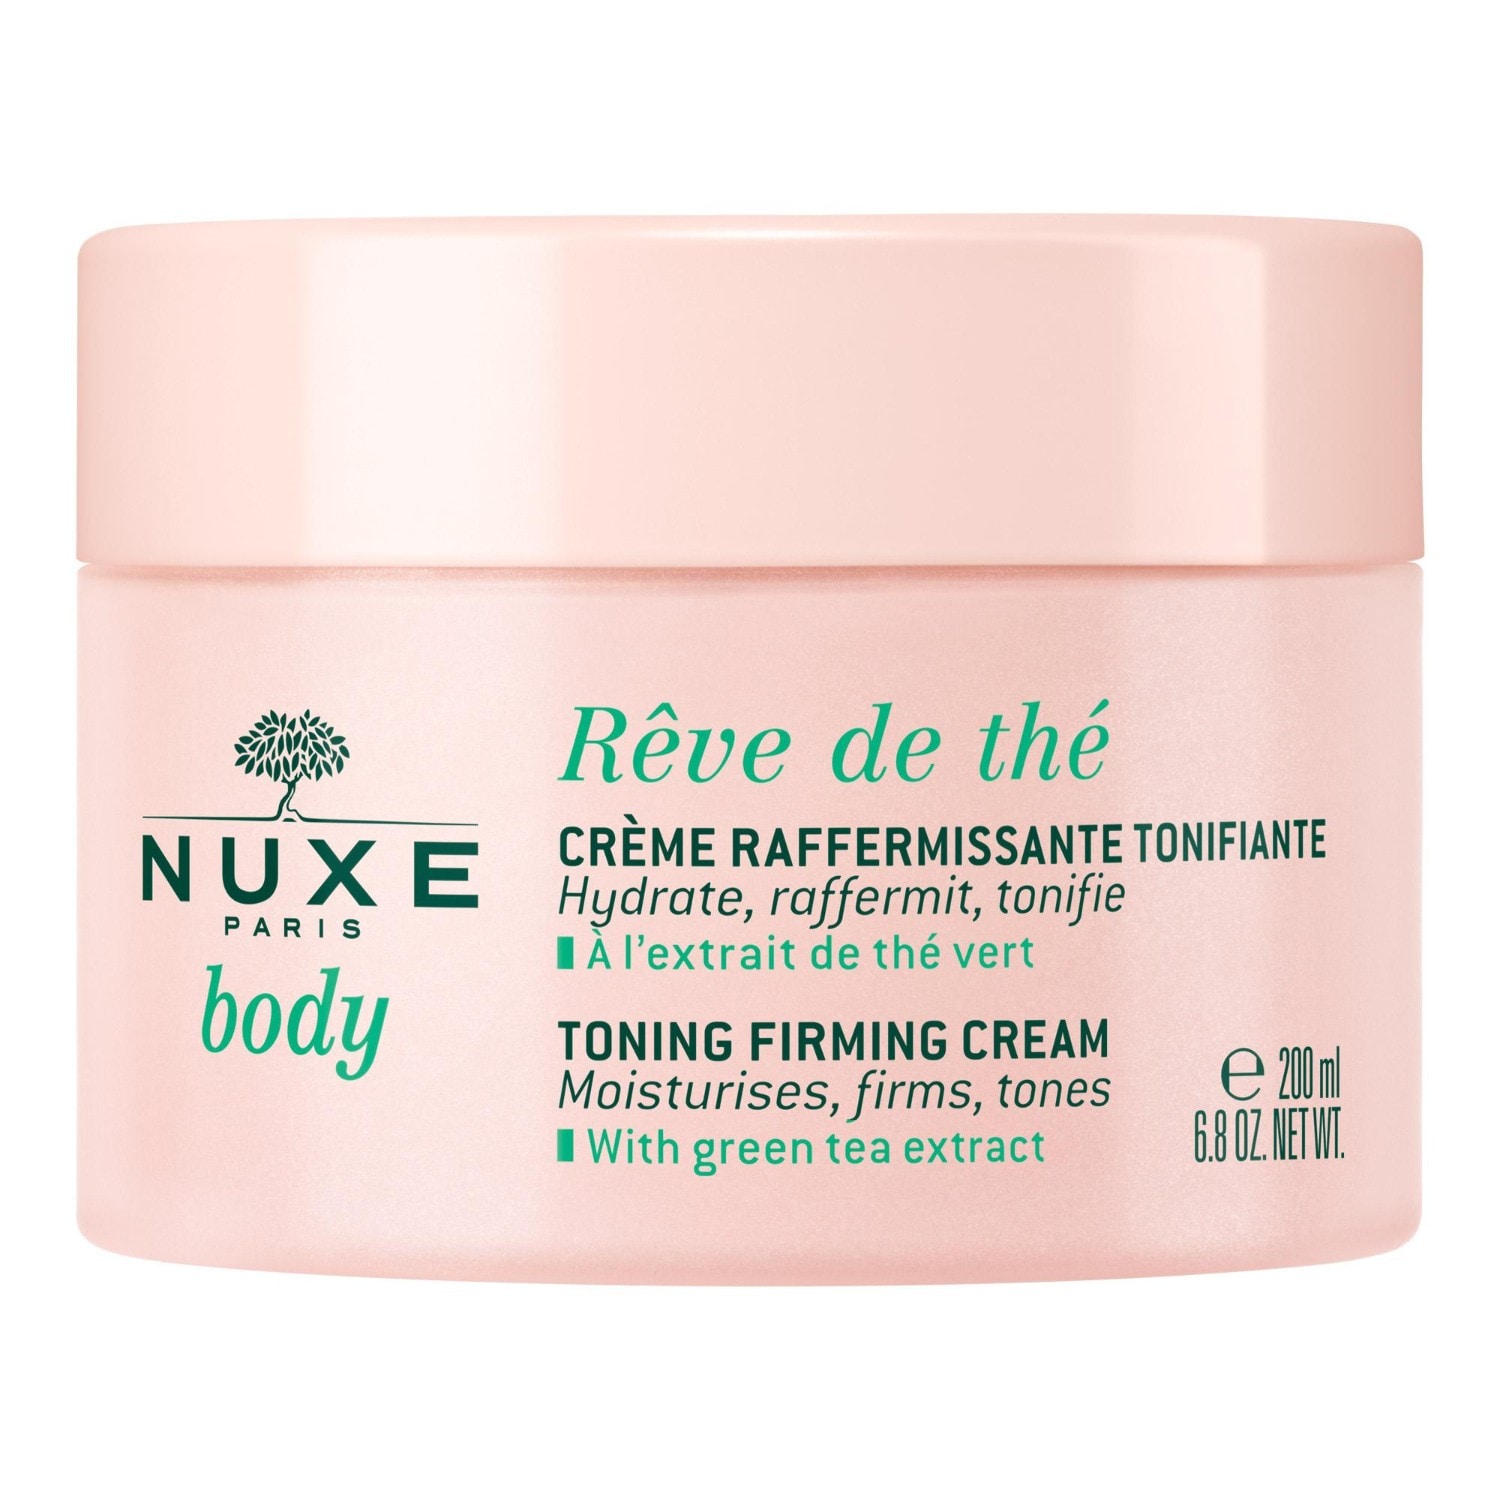 Nuxe Reve de The - Revitalizing and firming body cream